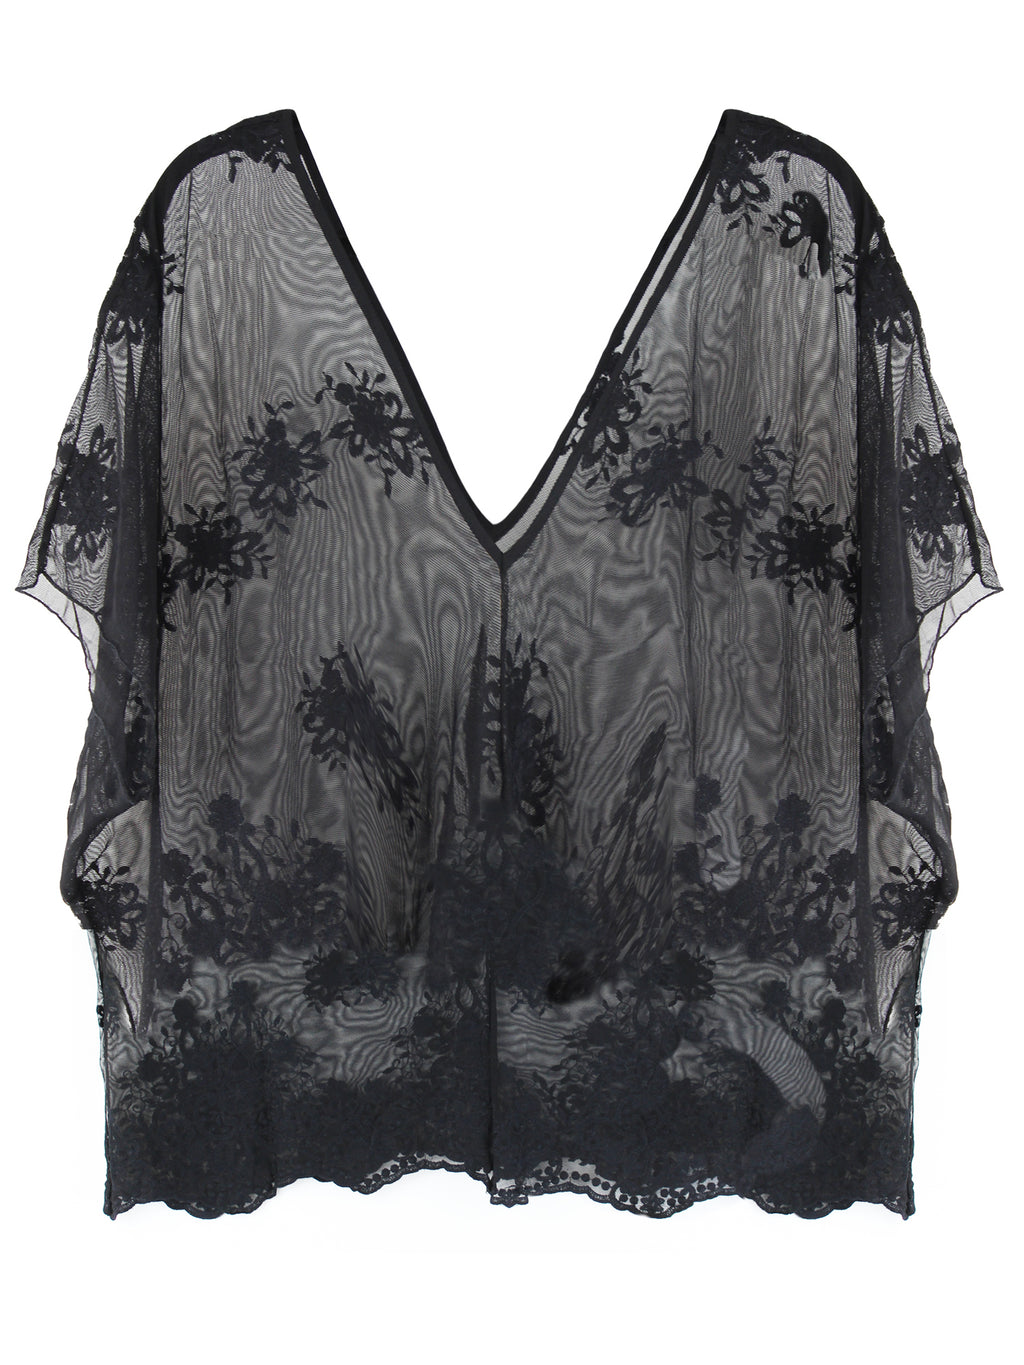 Sheer Black V-Neck Lacey Lightweight Beach Cover-Up